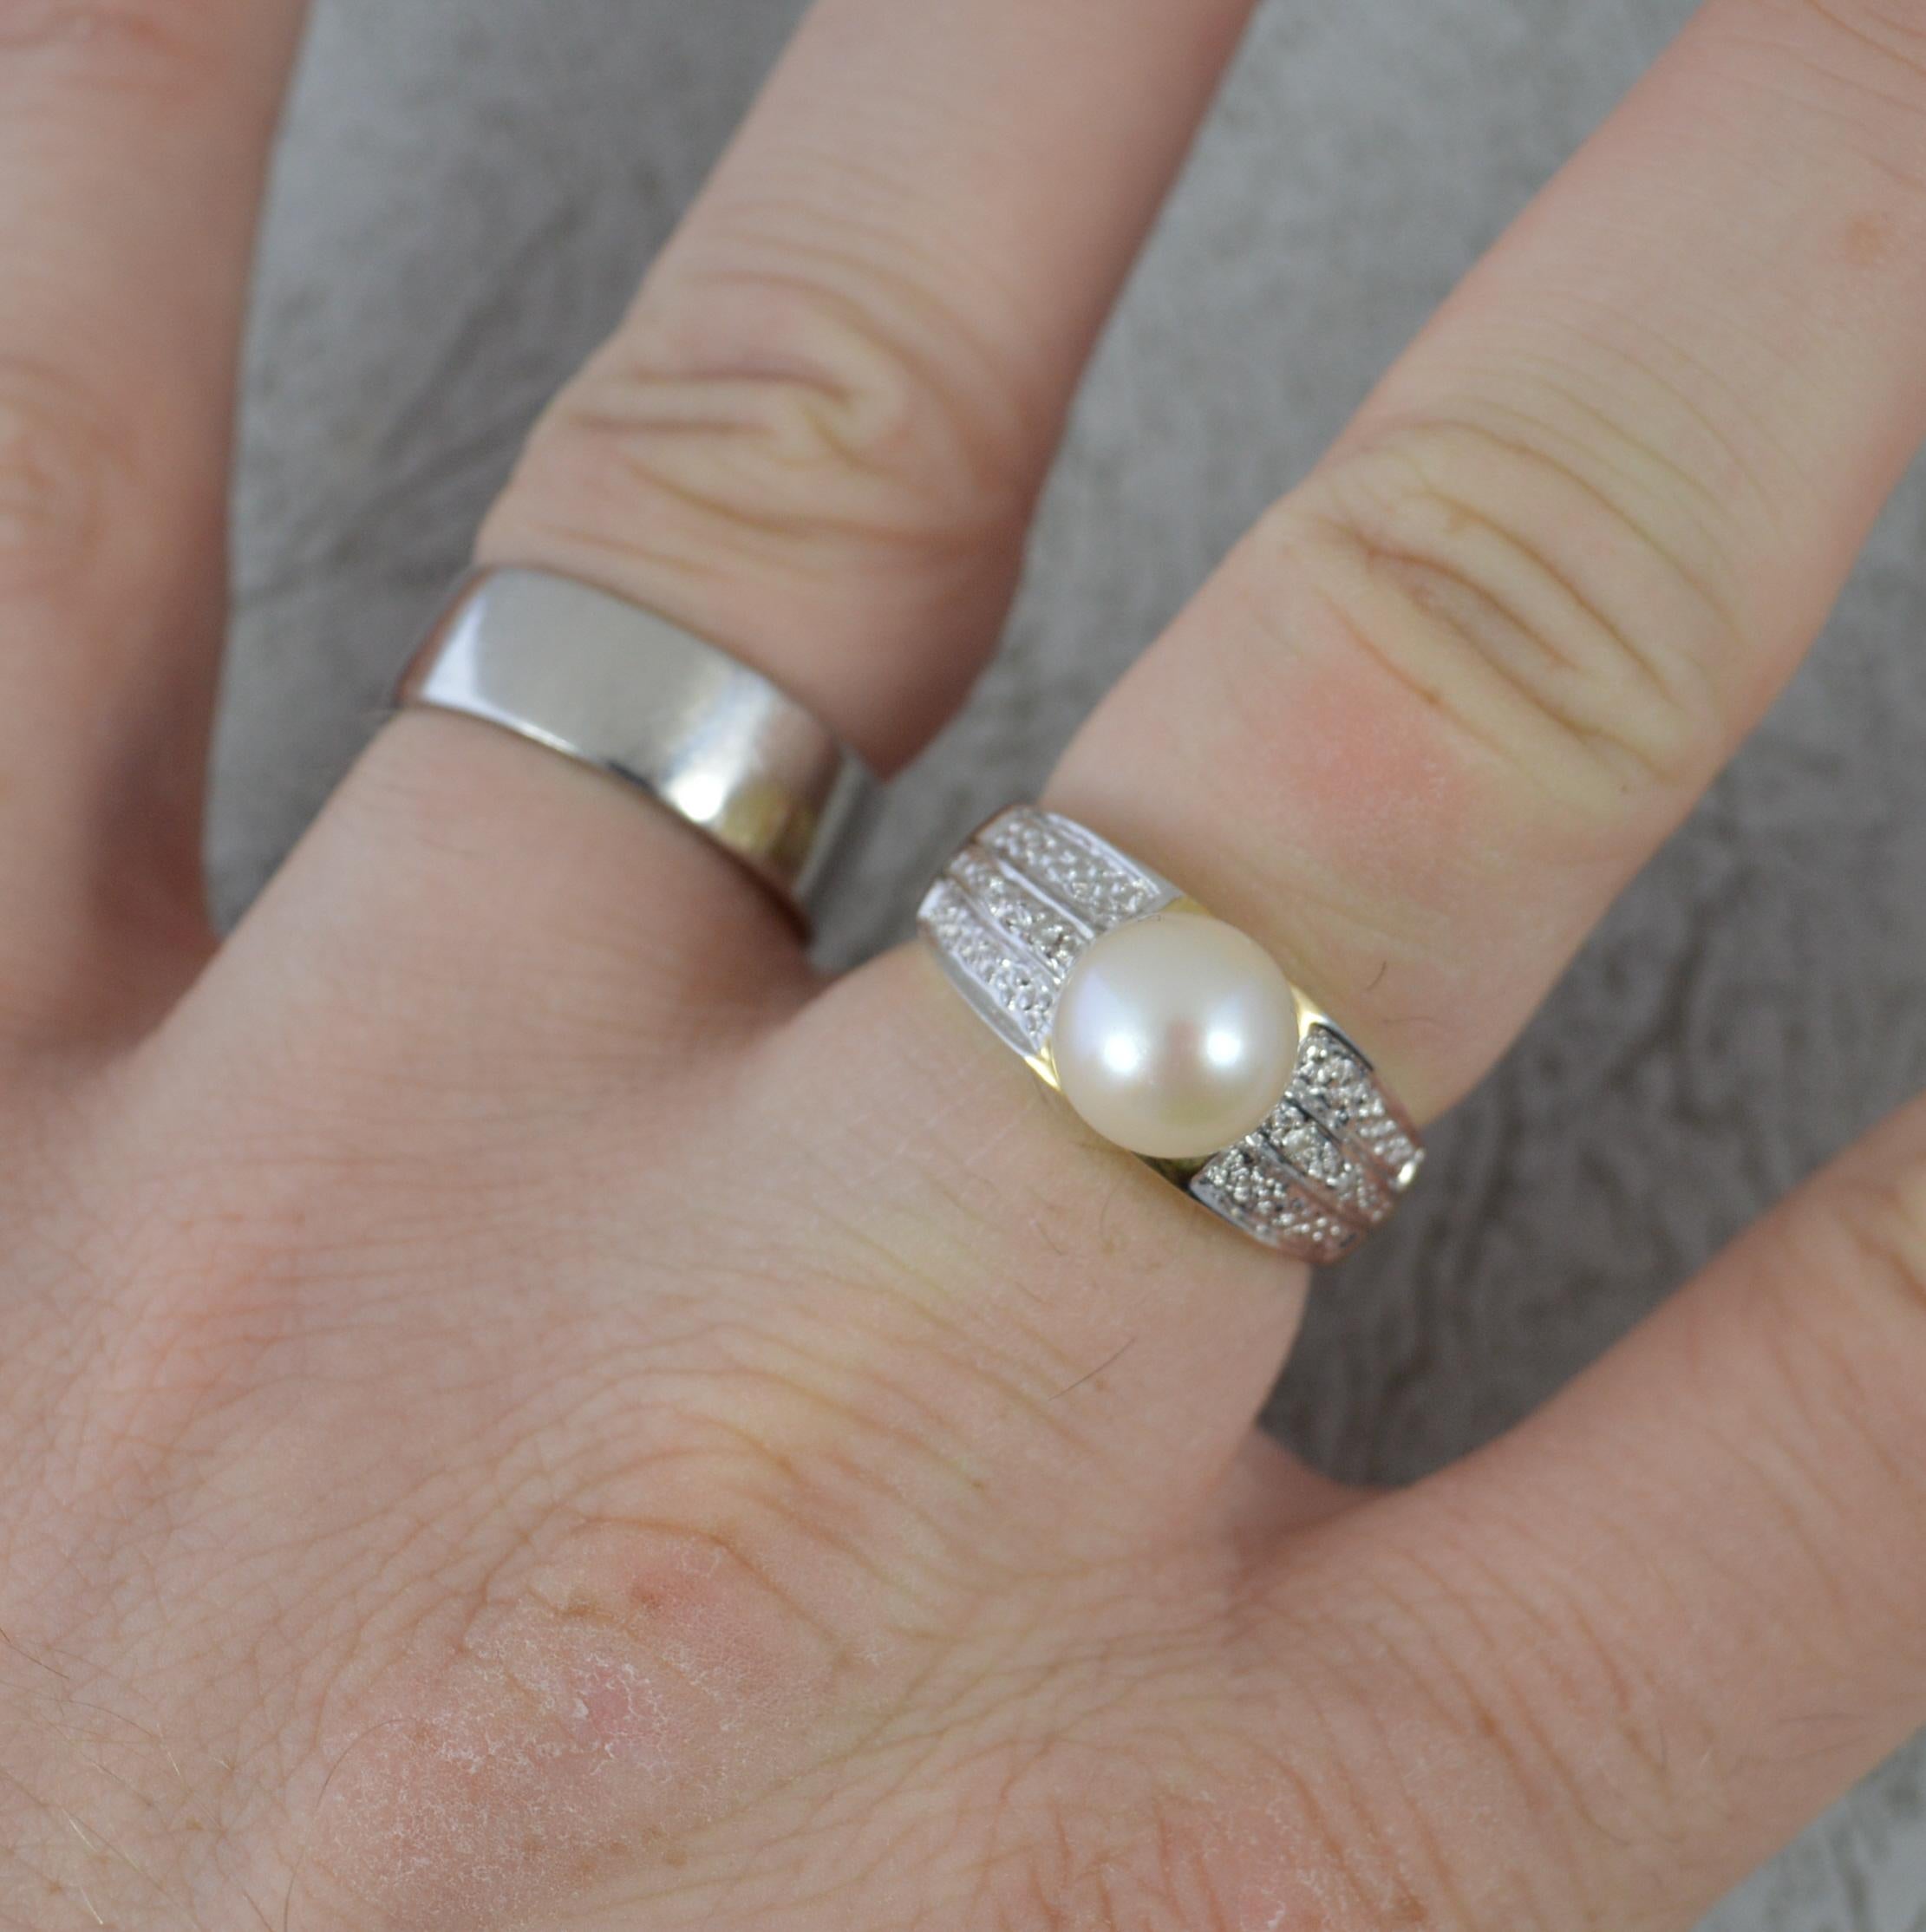 A superb Pearl and Diamond ring.
Solid 14 carat yellow gold example with white gold setting to the sides.
Designed with an 8mm diameter pearl to centre and a small diamond to each side.

Condition ; Very good. Clean band. Well set stones. Issue